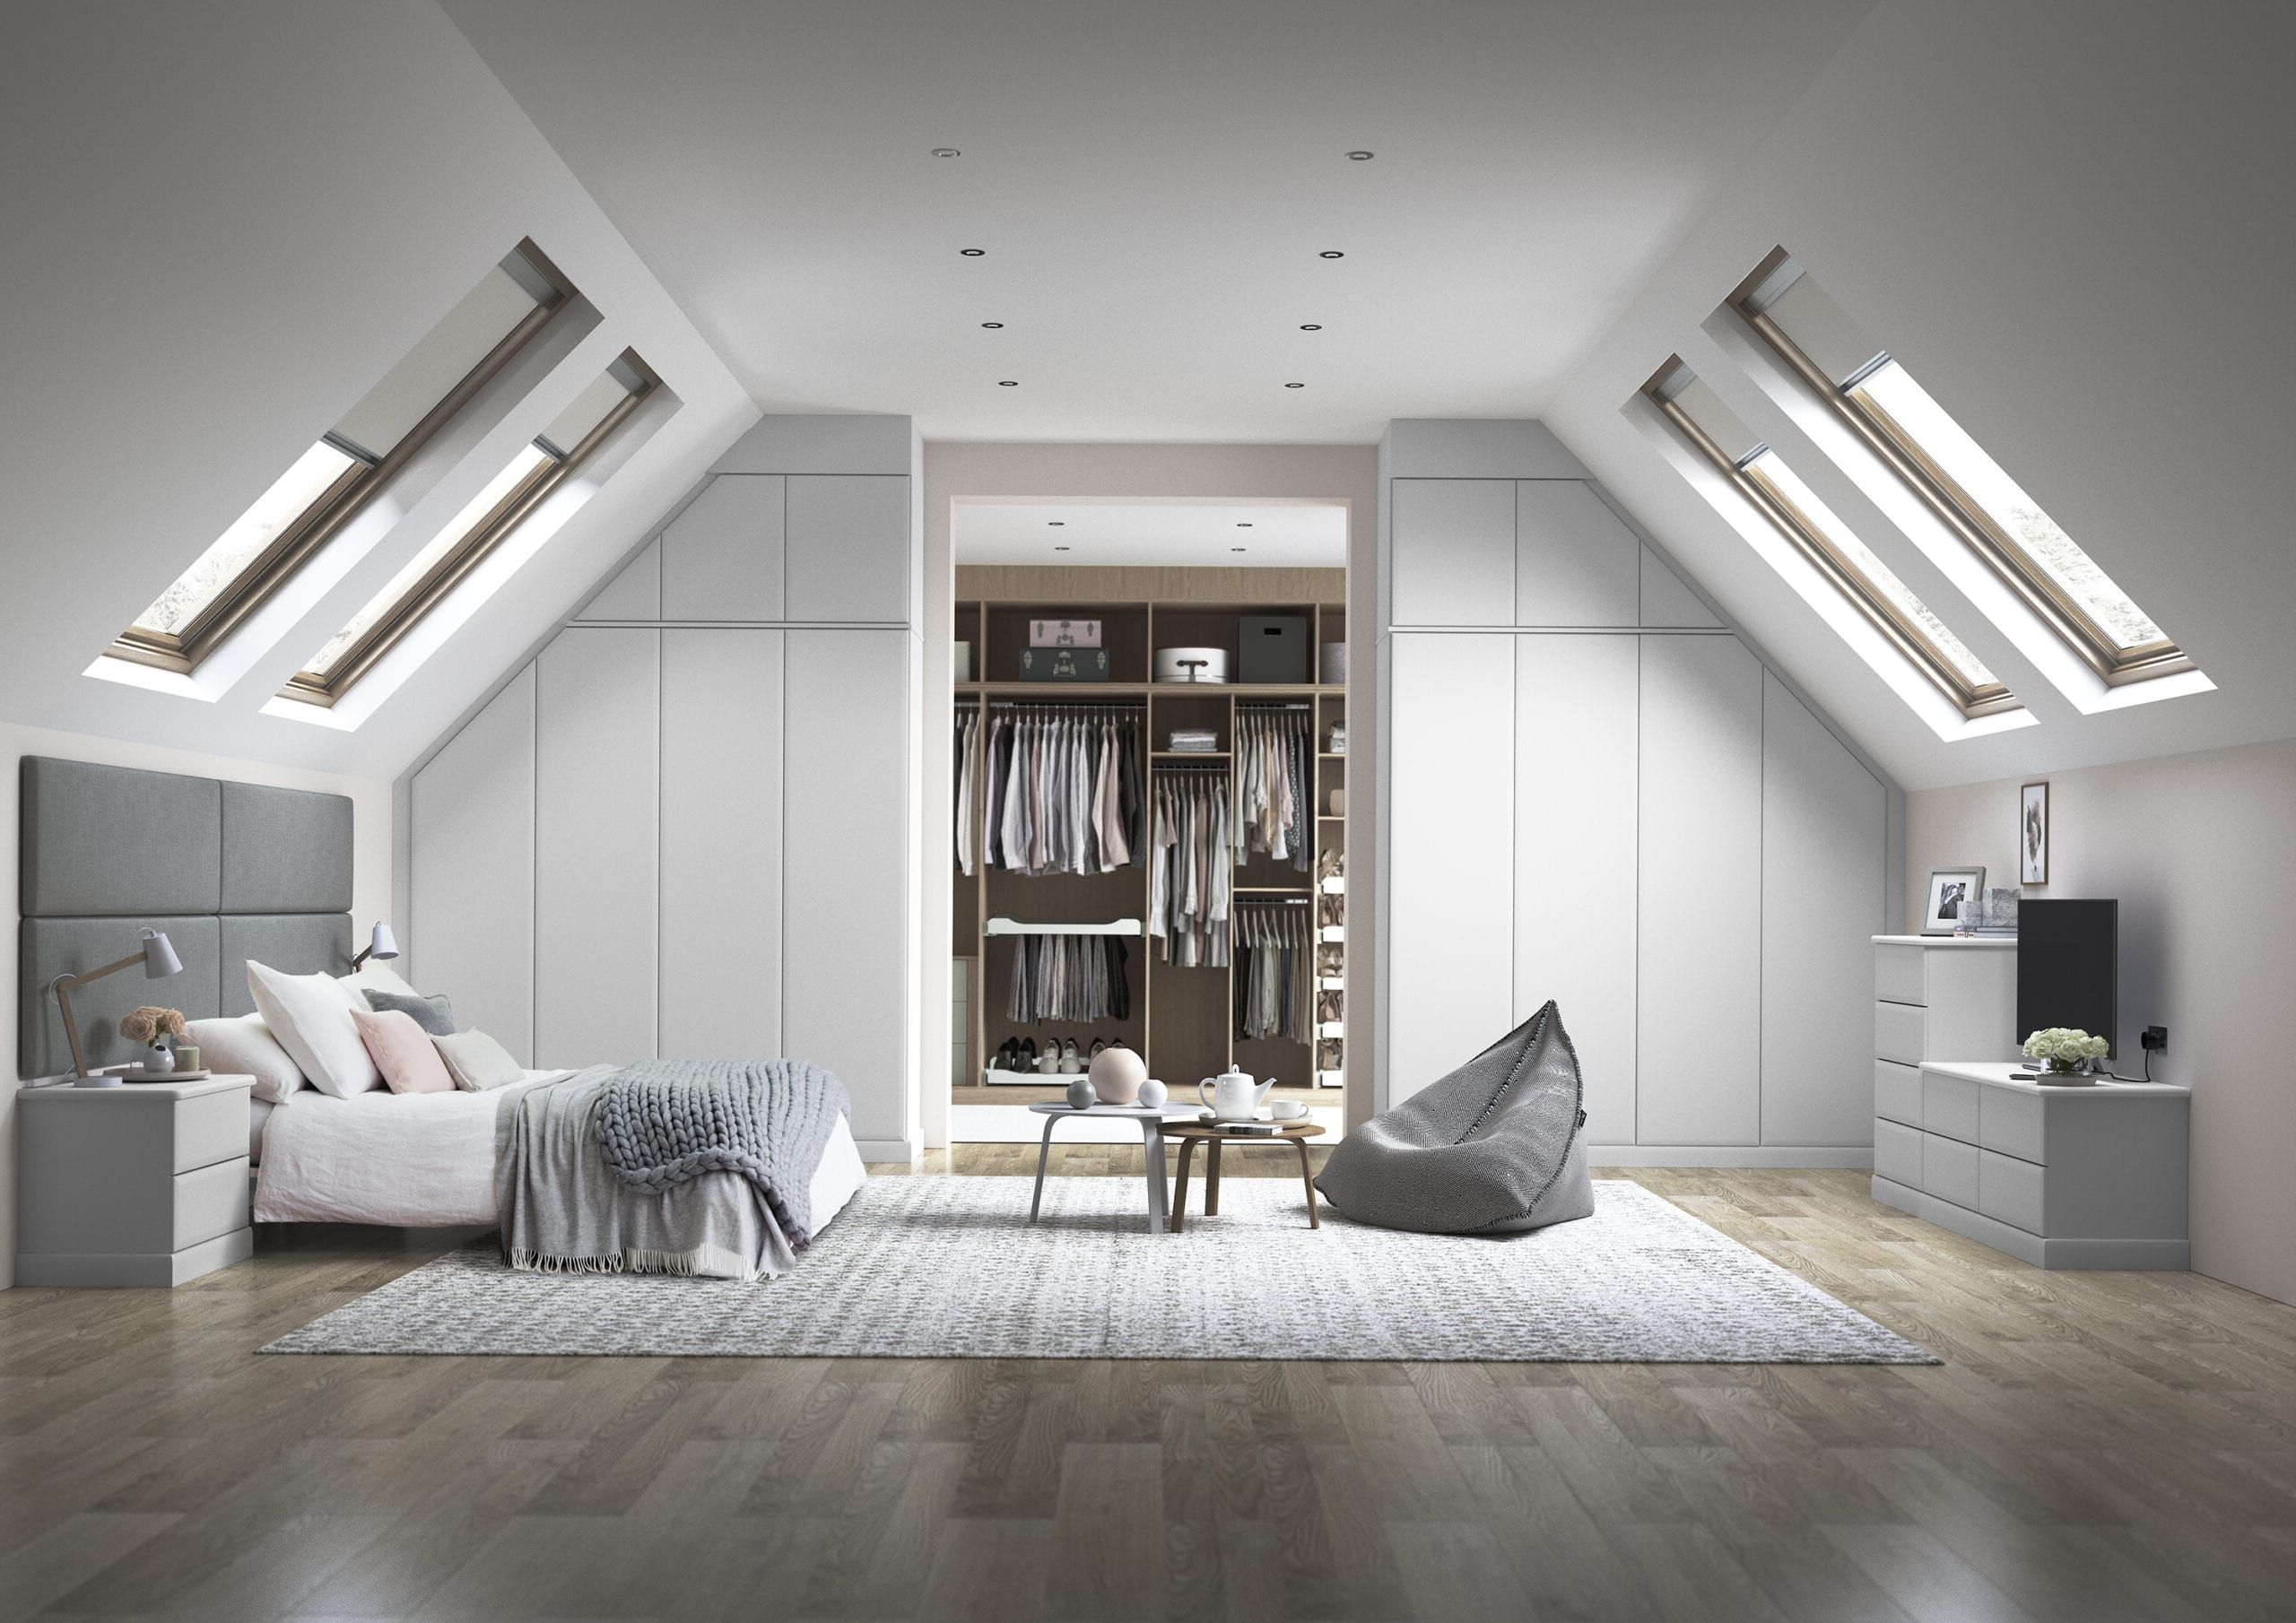 Most Popular Types Of Fitted Bedroom Wardrobes | Ashford Kitchens Pertaining To Bedroom Wardrobes (View 16 of 20)